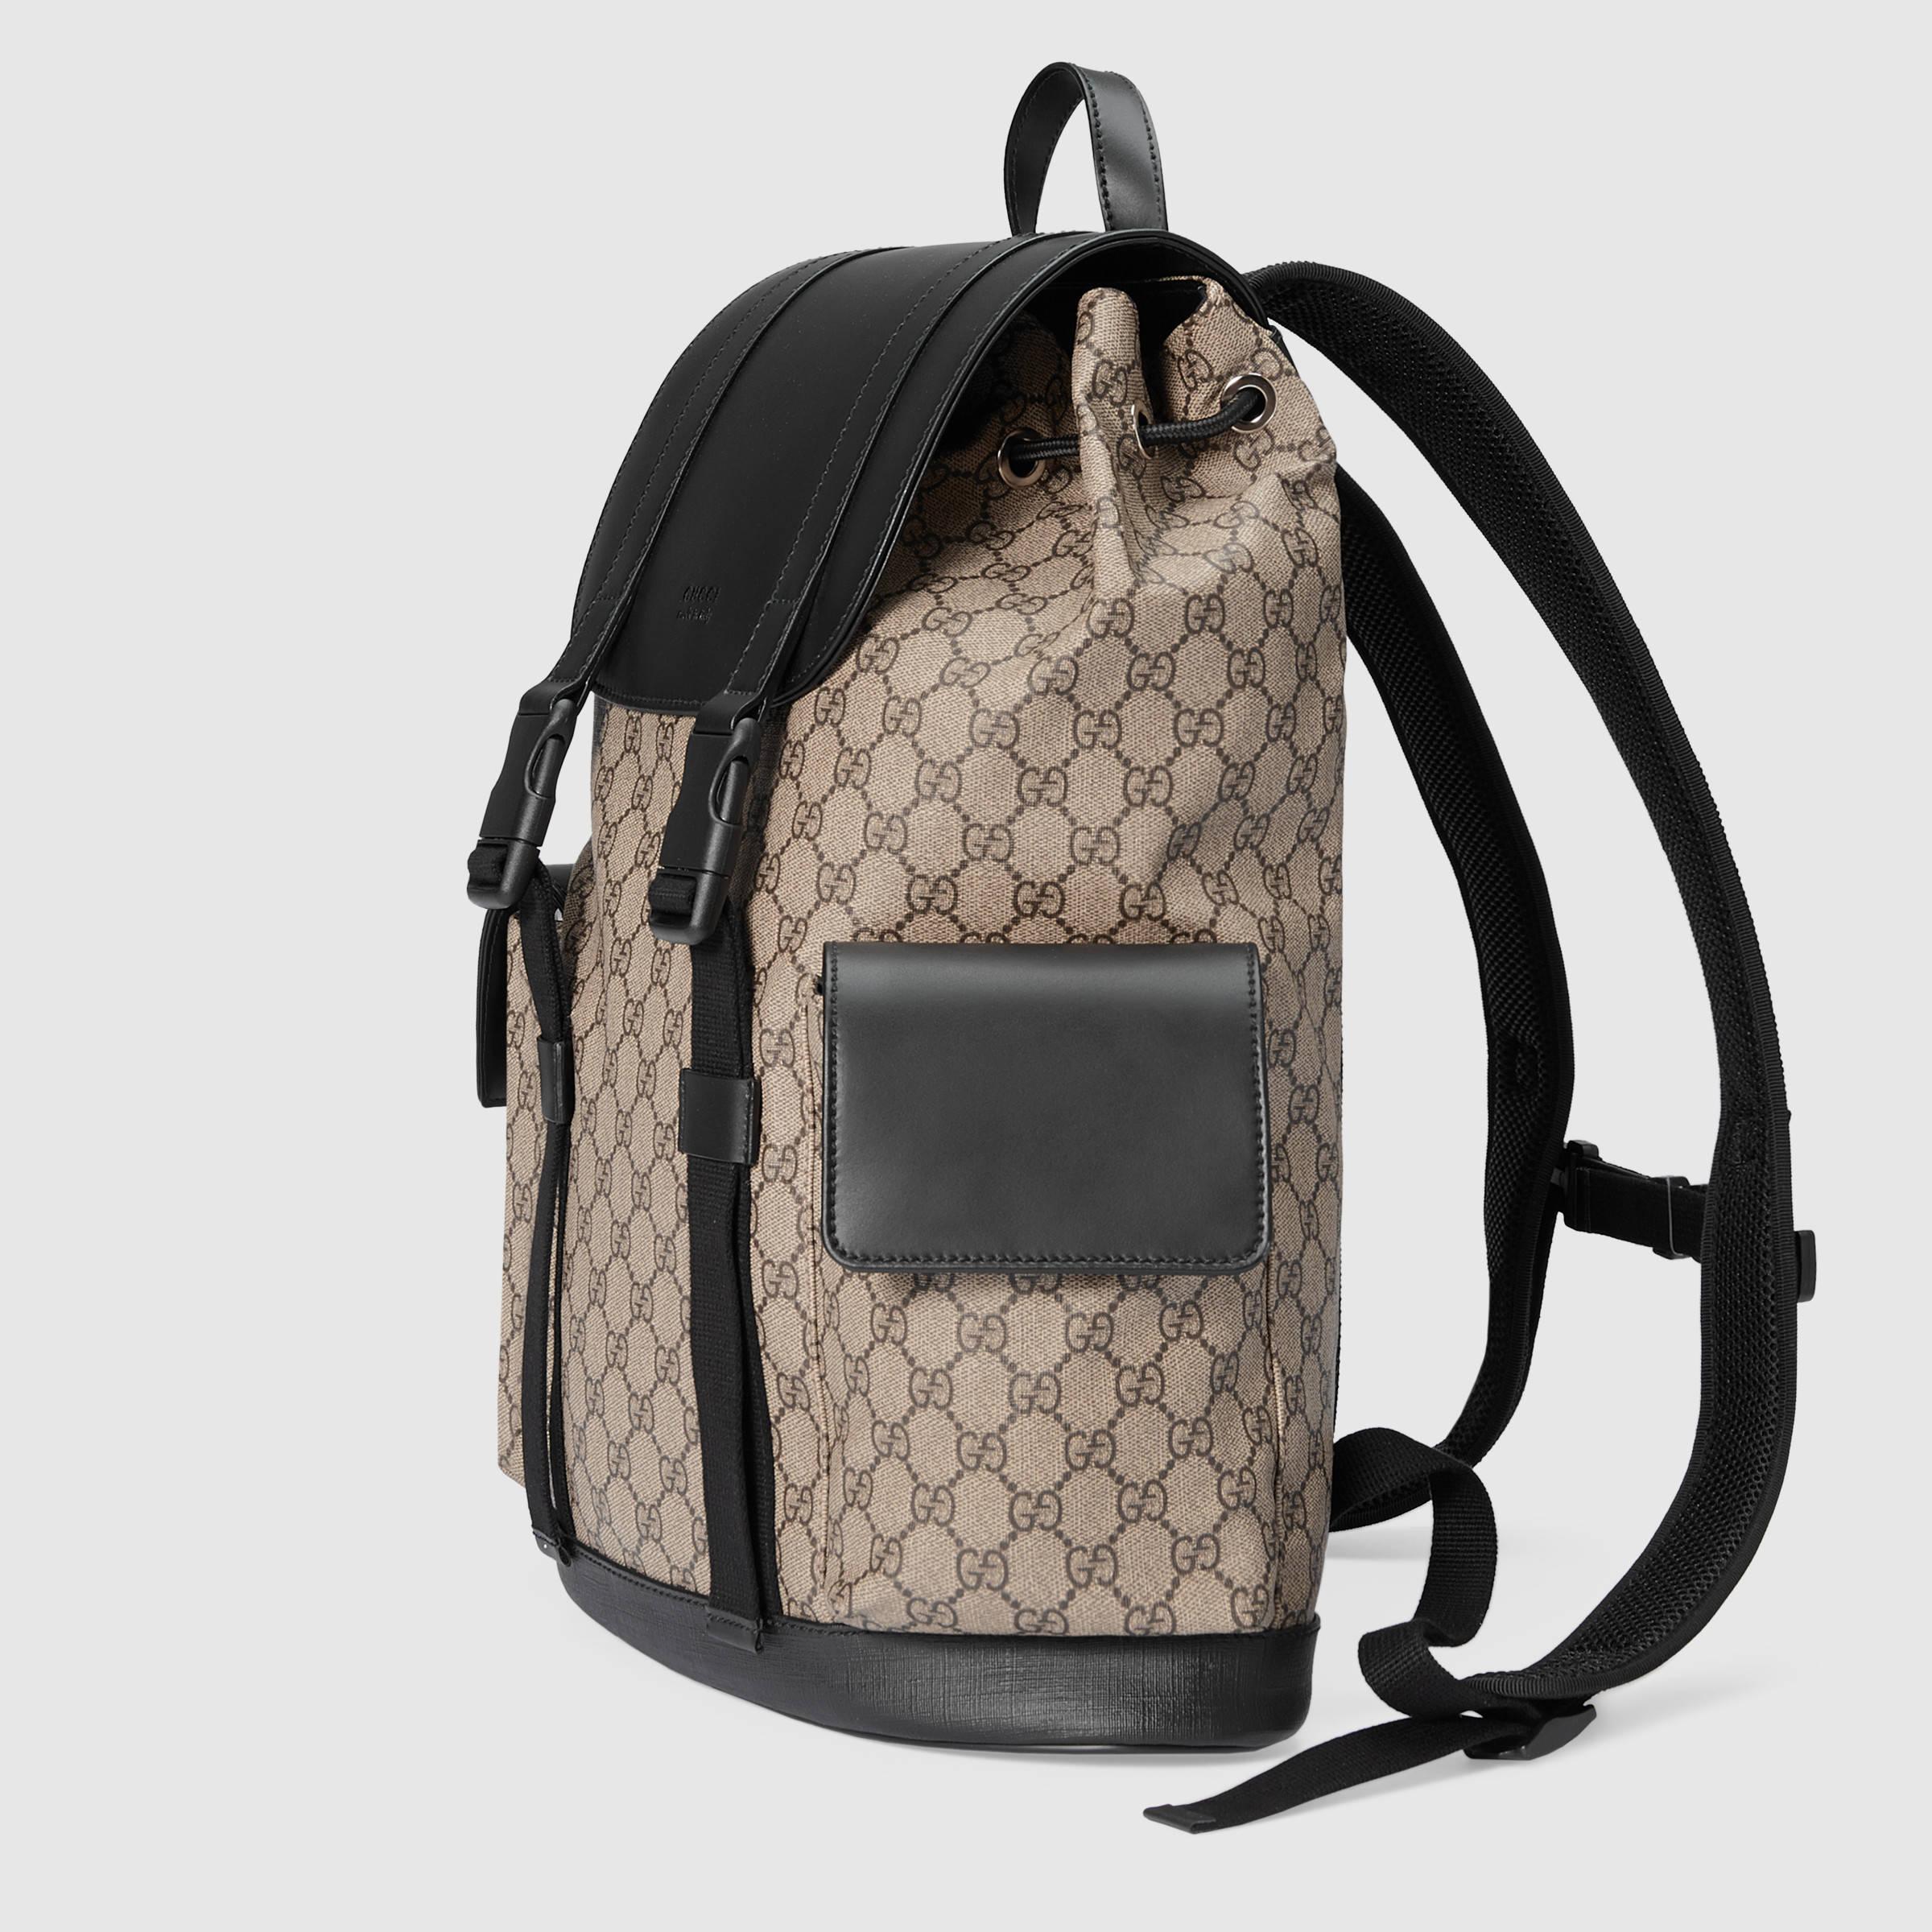 Gucci GG Supreme Canvas Backpack in Gray for Men - Lyst